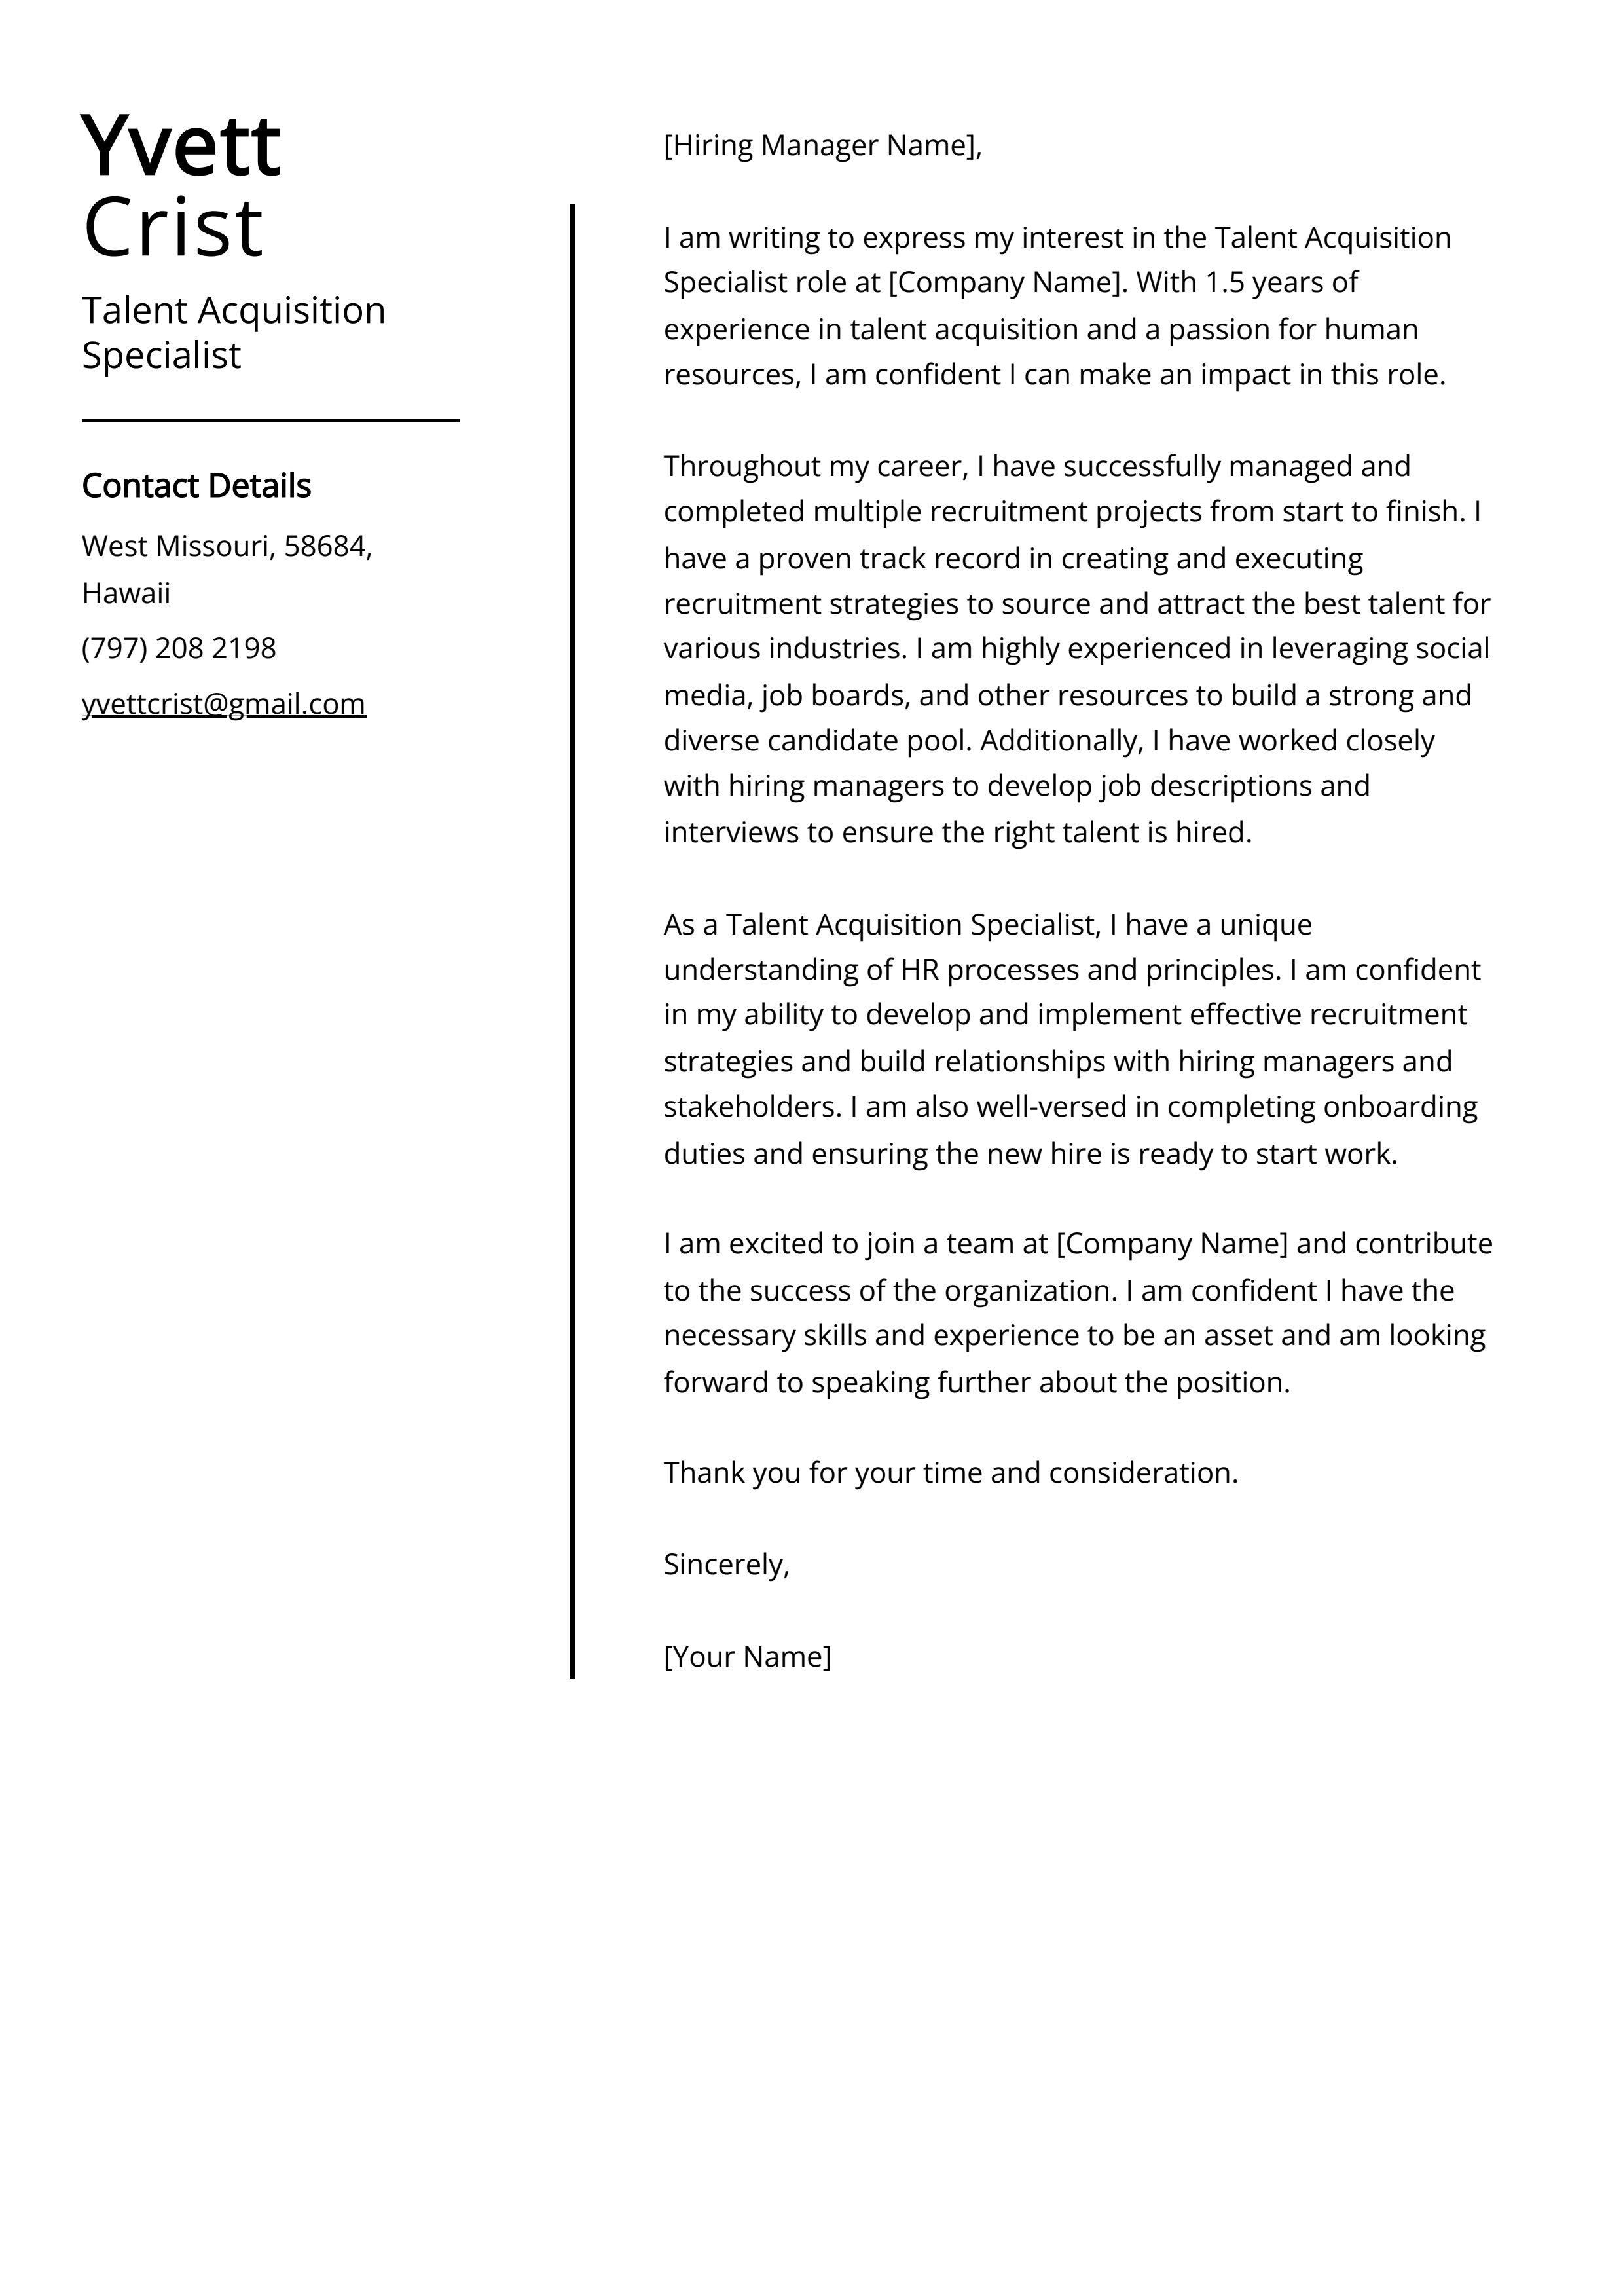 Talent Acquisition Specialist Cover Letter Example